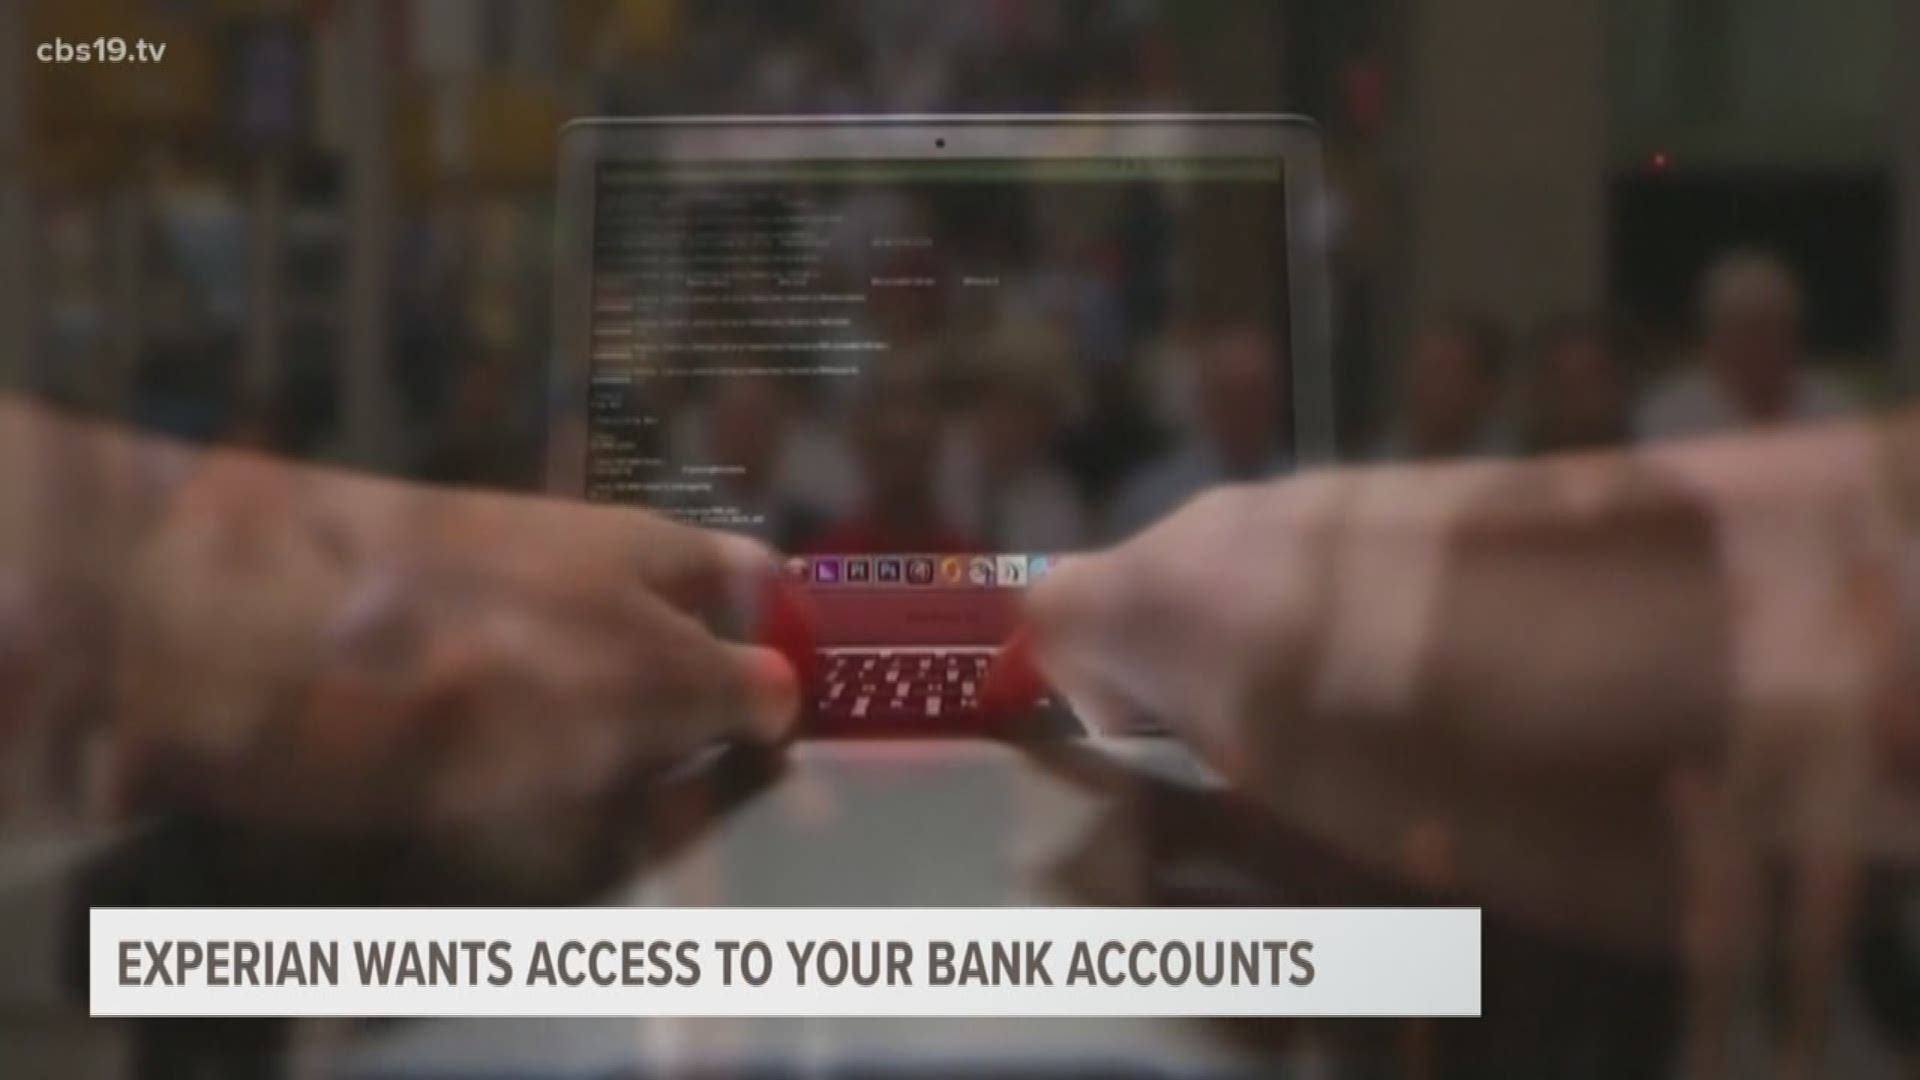 Once your credit has taken a hit, it could take months, even years, to get your score back in good standing. But a new program from Experian hopes to assist with that hurdle. The agency is hoping to provide consumers a credit boost through "Experian Boost